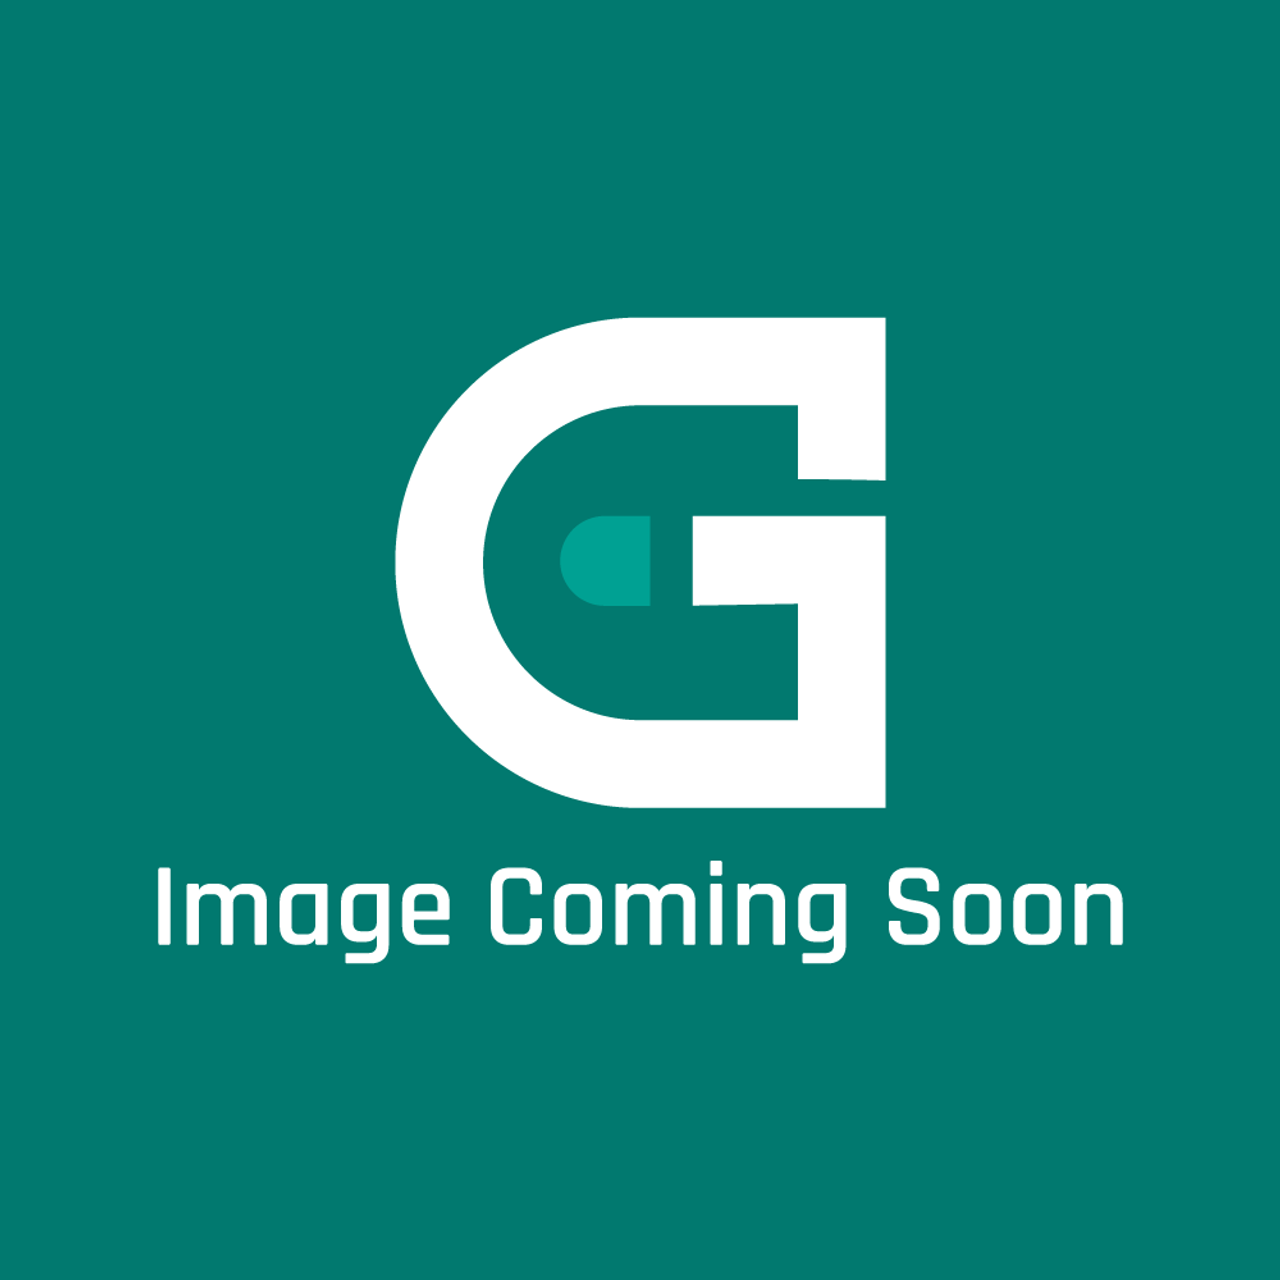 GE Appliances WB18X46776 - Harness Cooktop - Image Coming Soon!